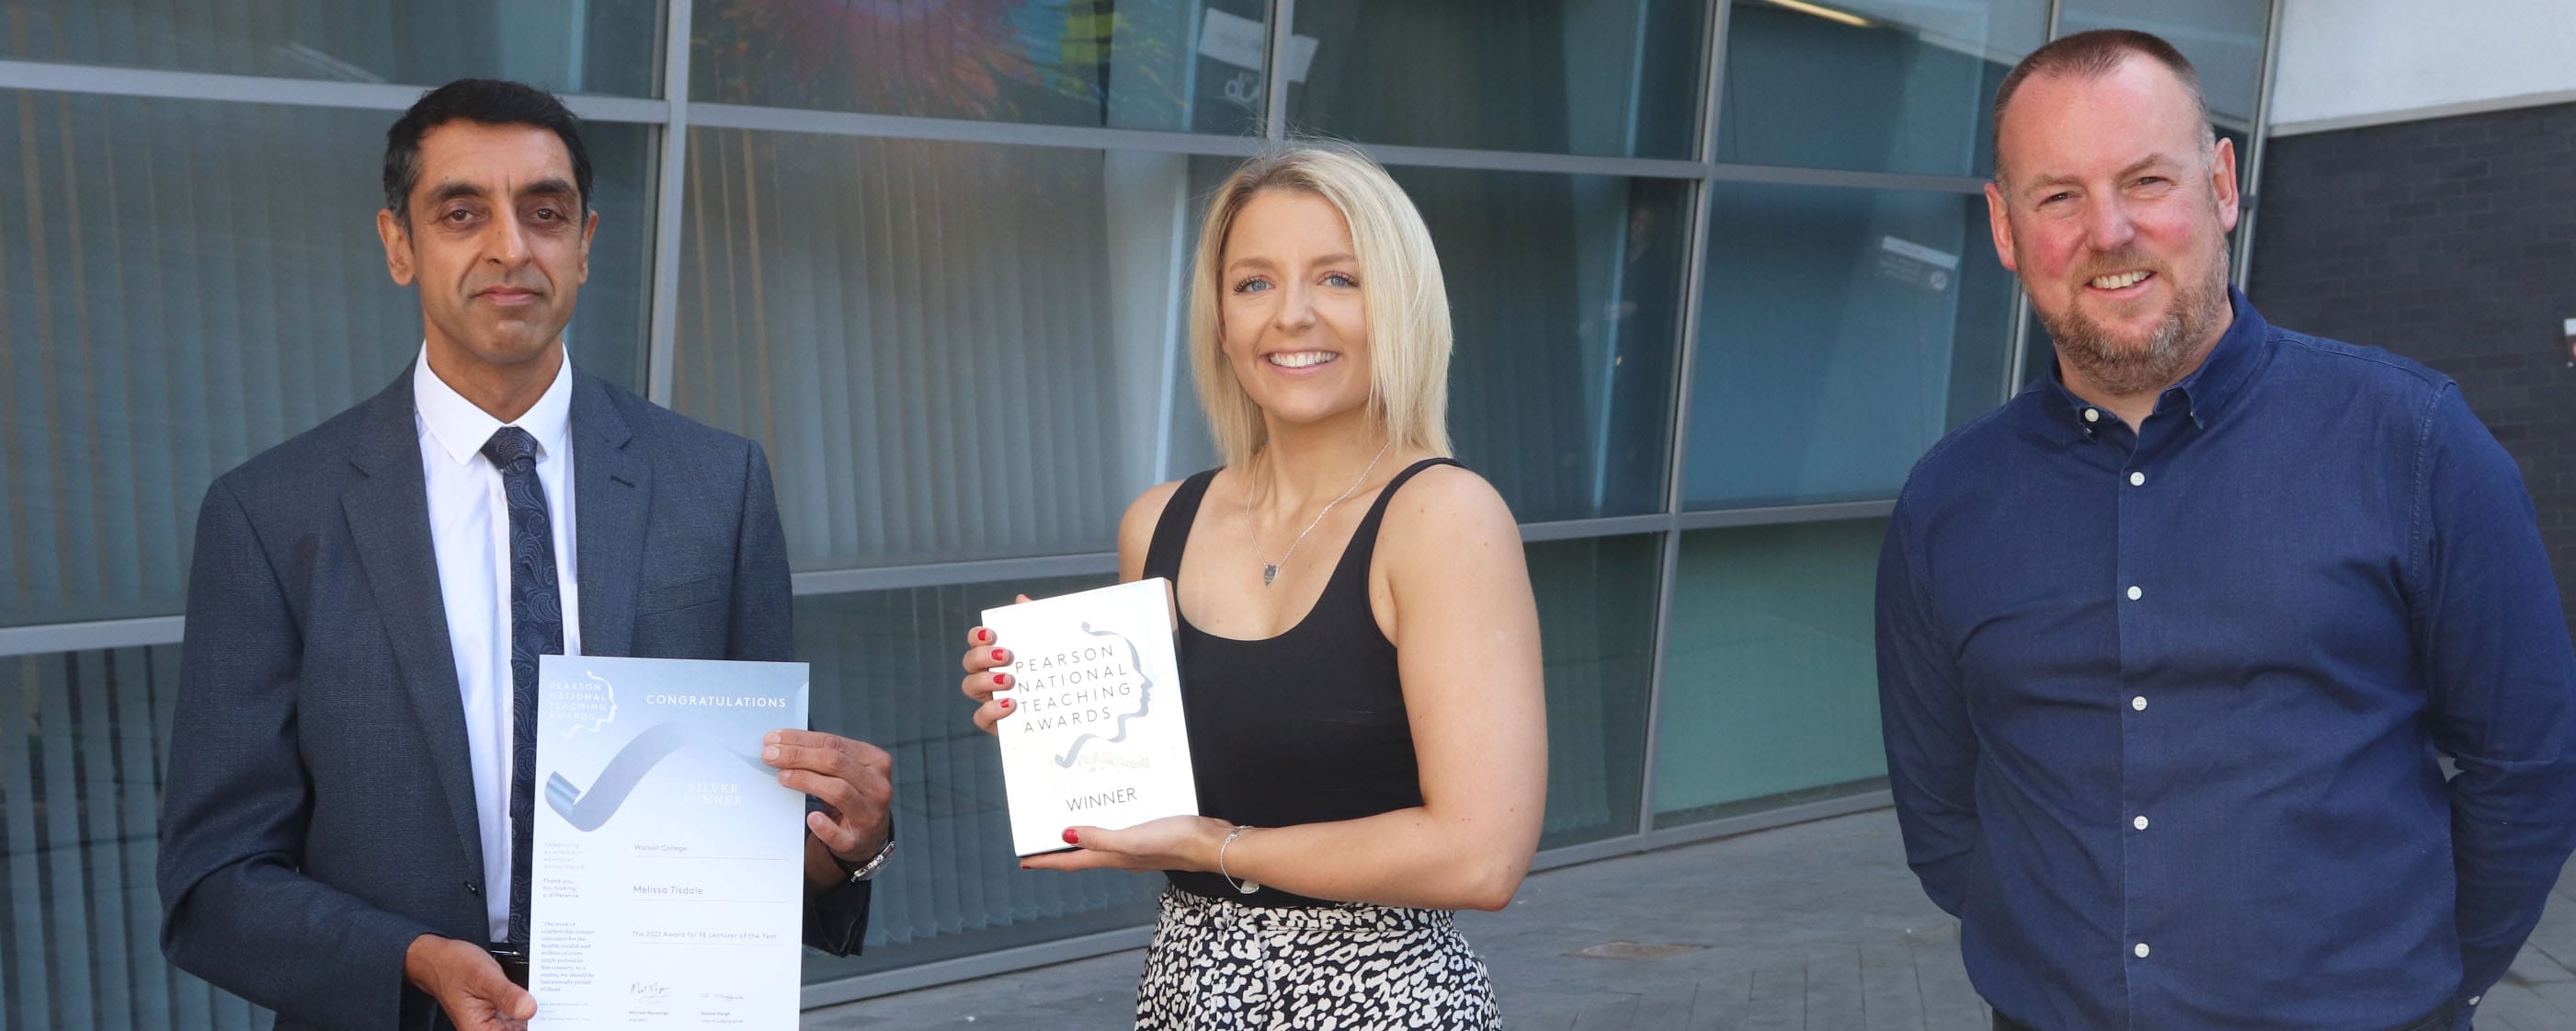 female media lecturer holds award presented by principal and Pearson representative facing